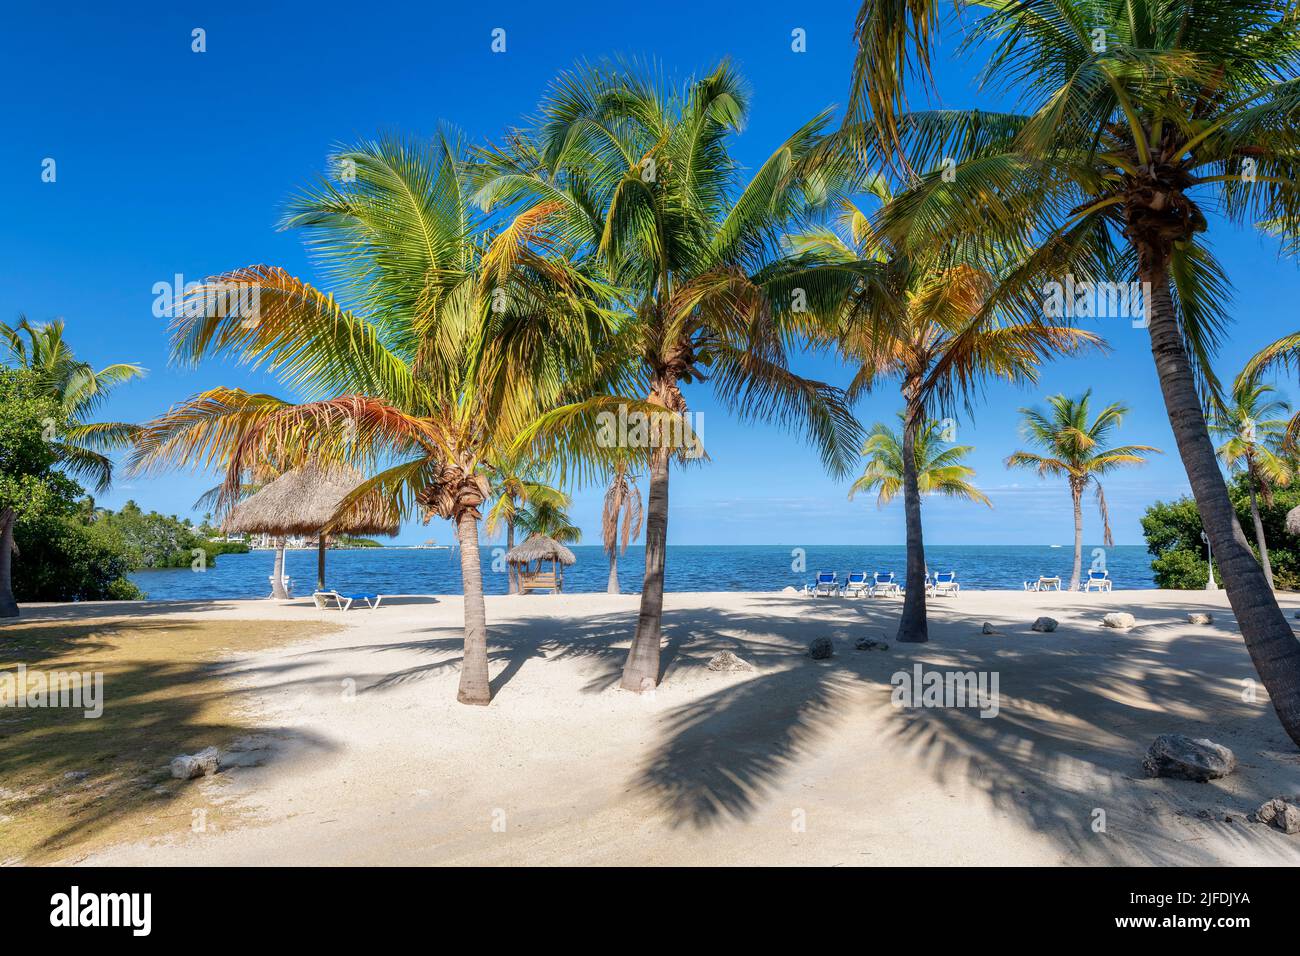 Palm trees in sunset beach state park in tropical island in Florida Keys Stock Photo